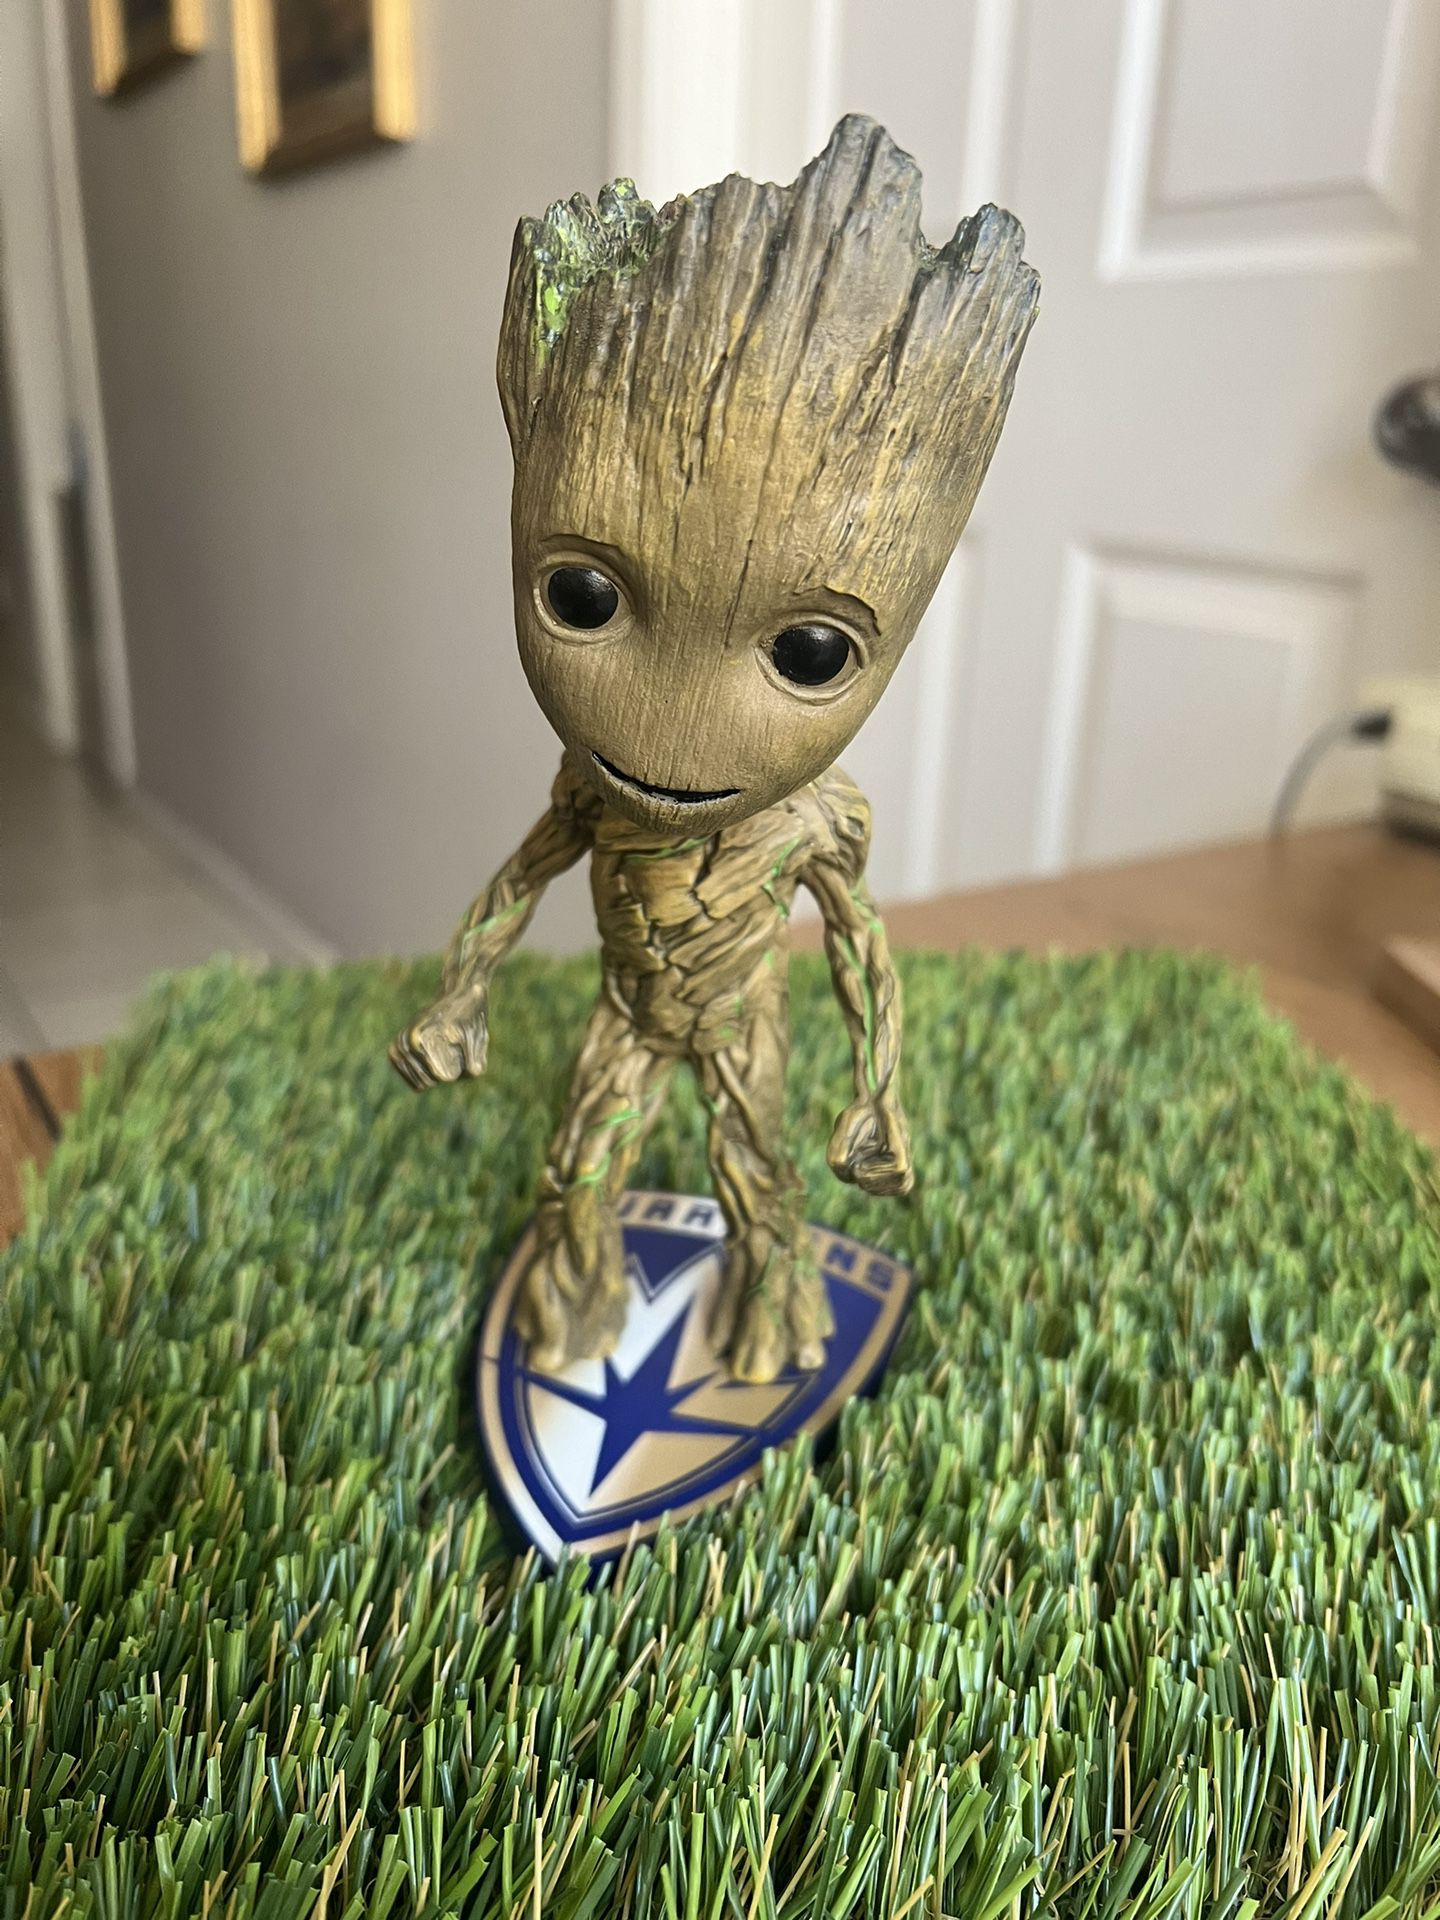 Marvel Guardians of the Galaxy 7"  Groot Bobblehead by Neca on Shield Figurine